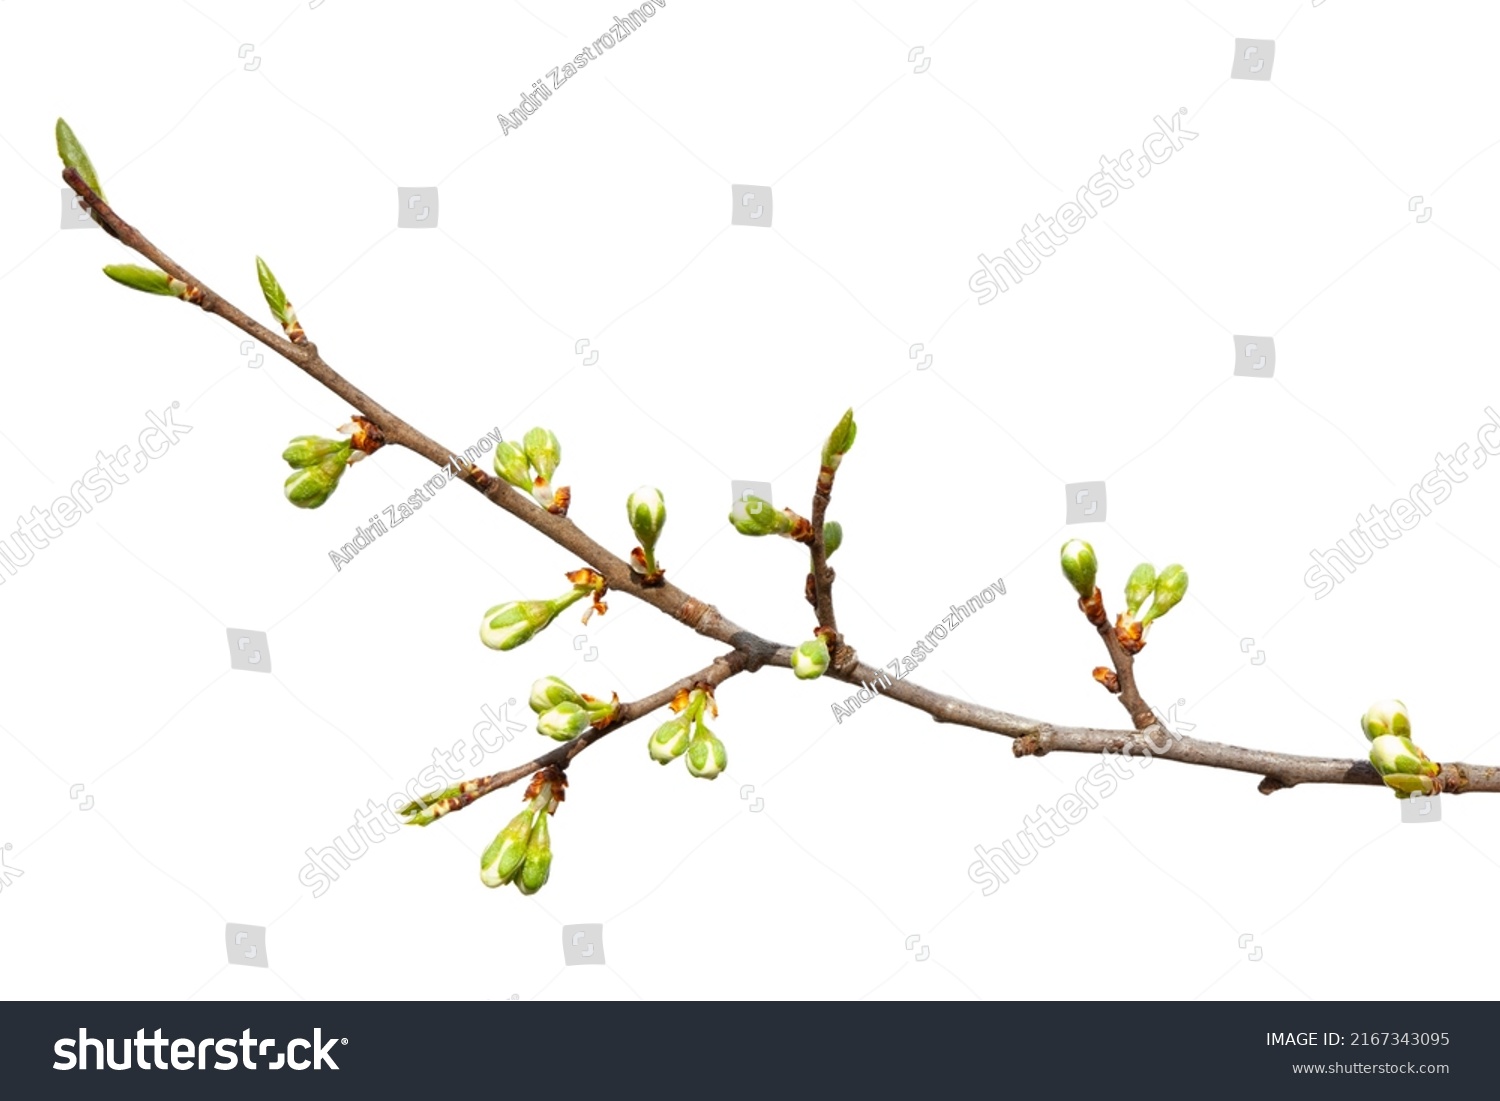 Spring tree branch with green buds isolated on white background. #2167343095